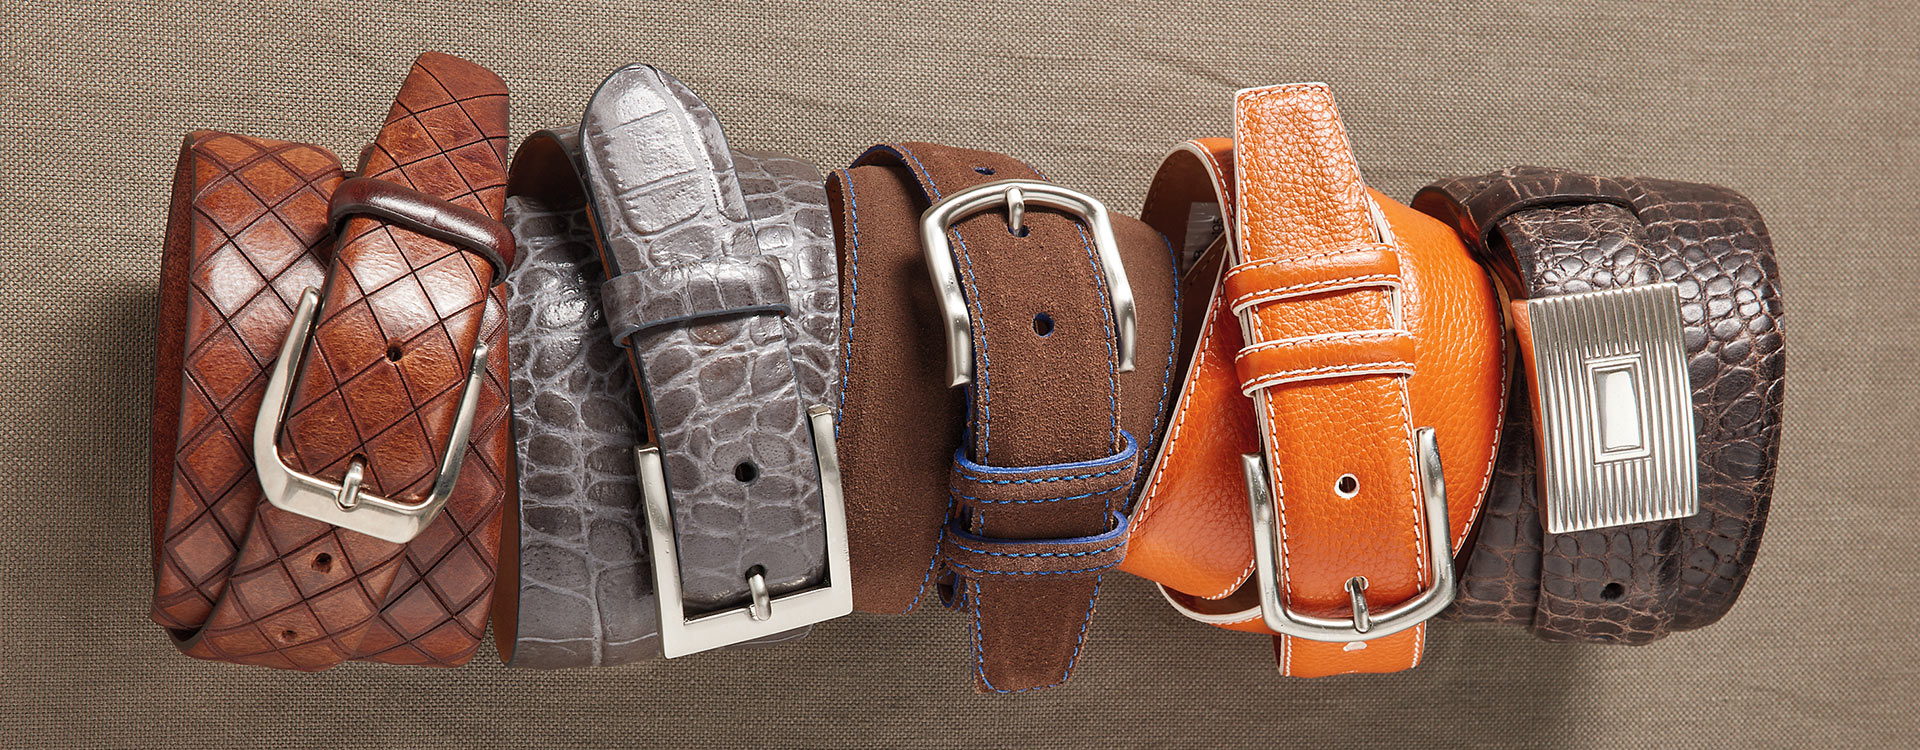 Leather Belts and Accessories Archives - Leather Image